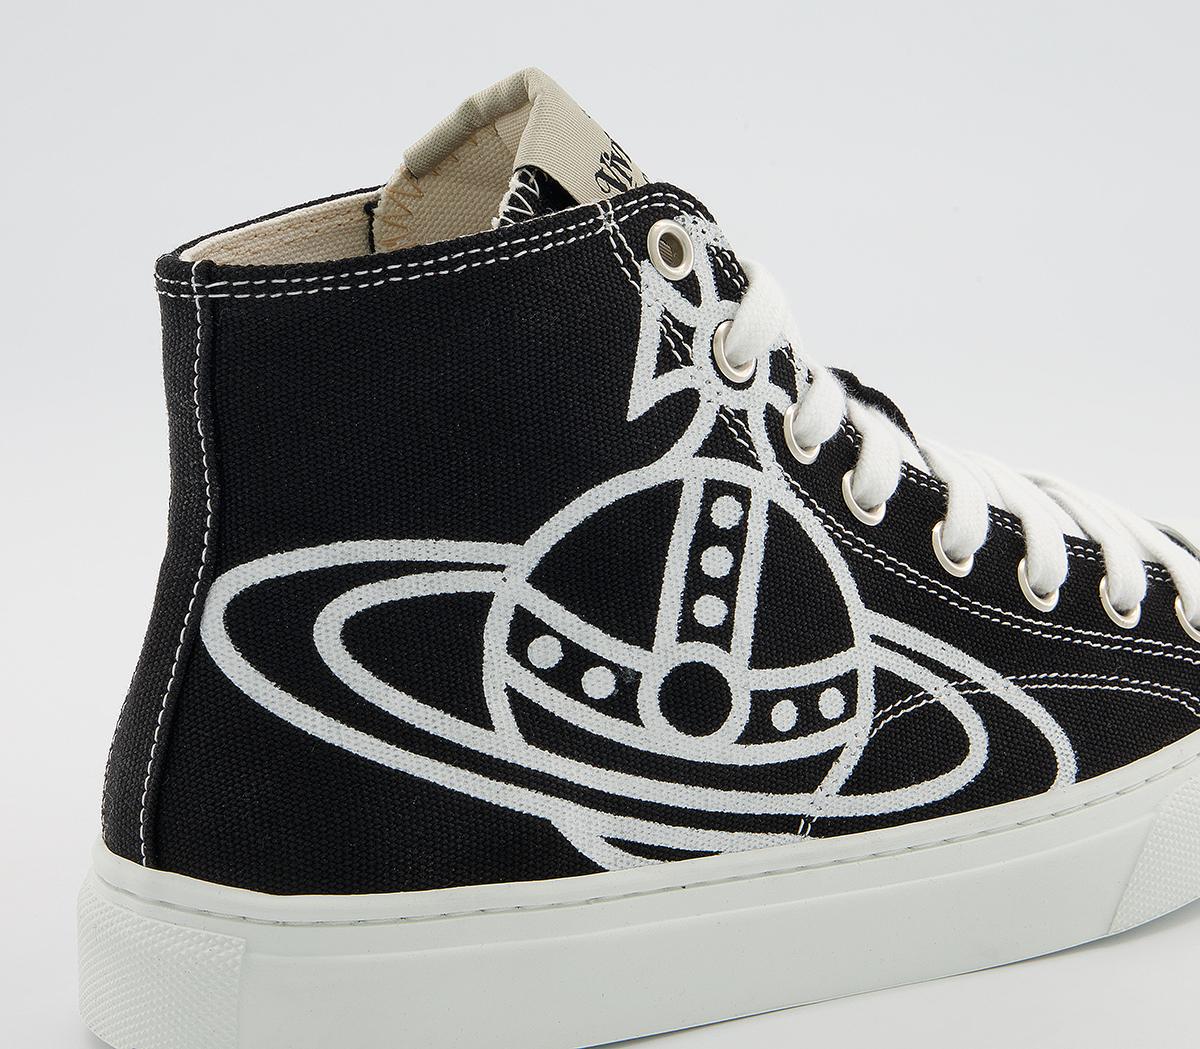 Vivienne Westwood Plimsoll High Top Trainers Black - Canvas Trainers